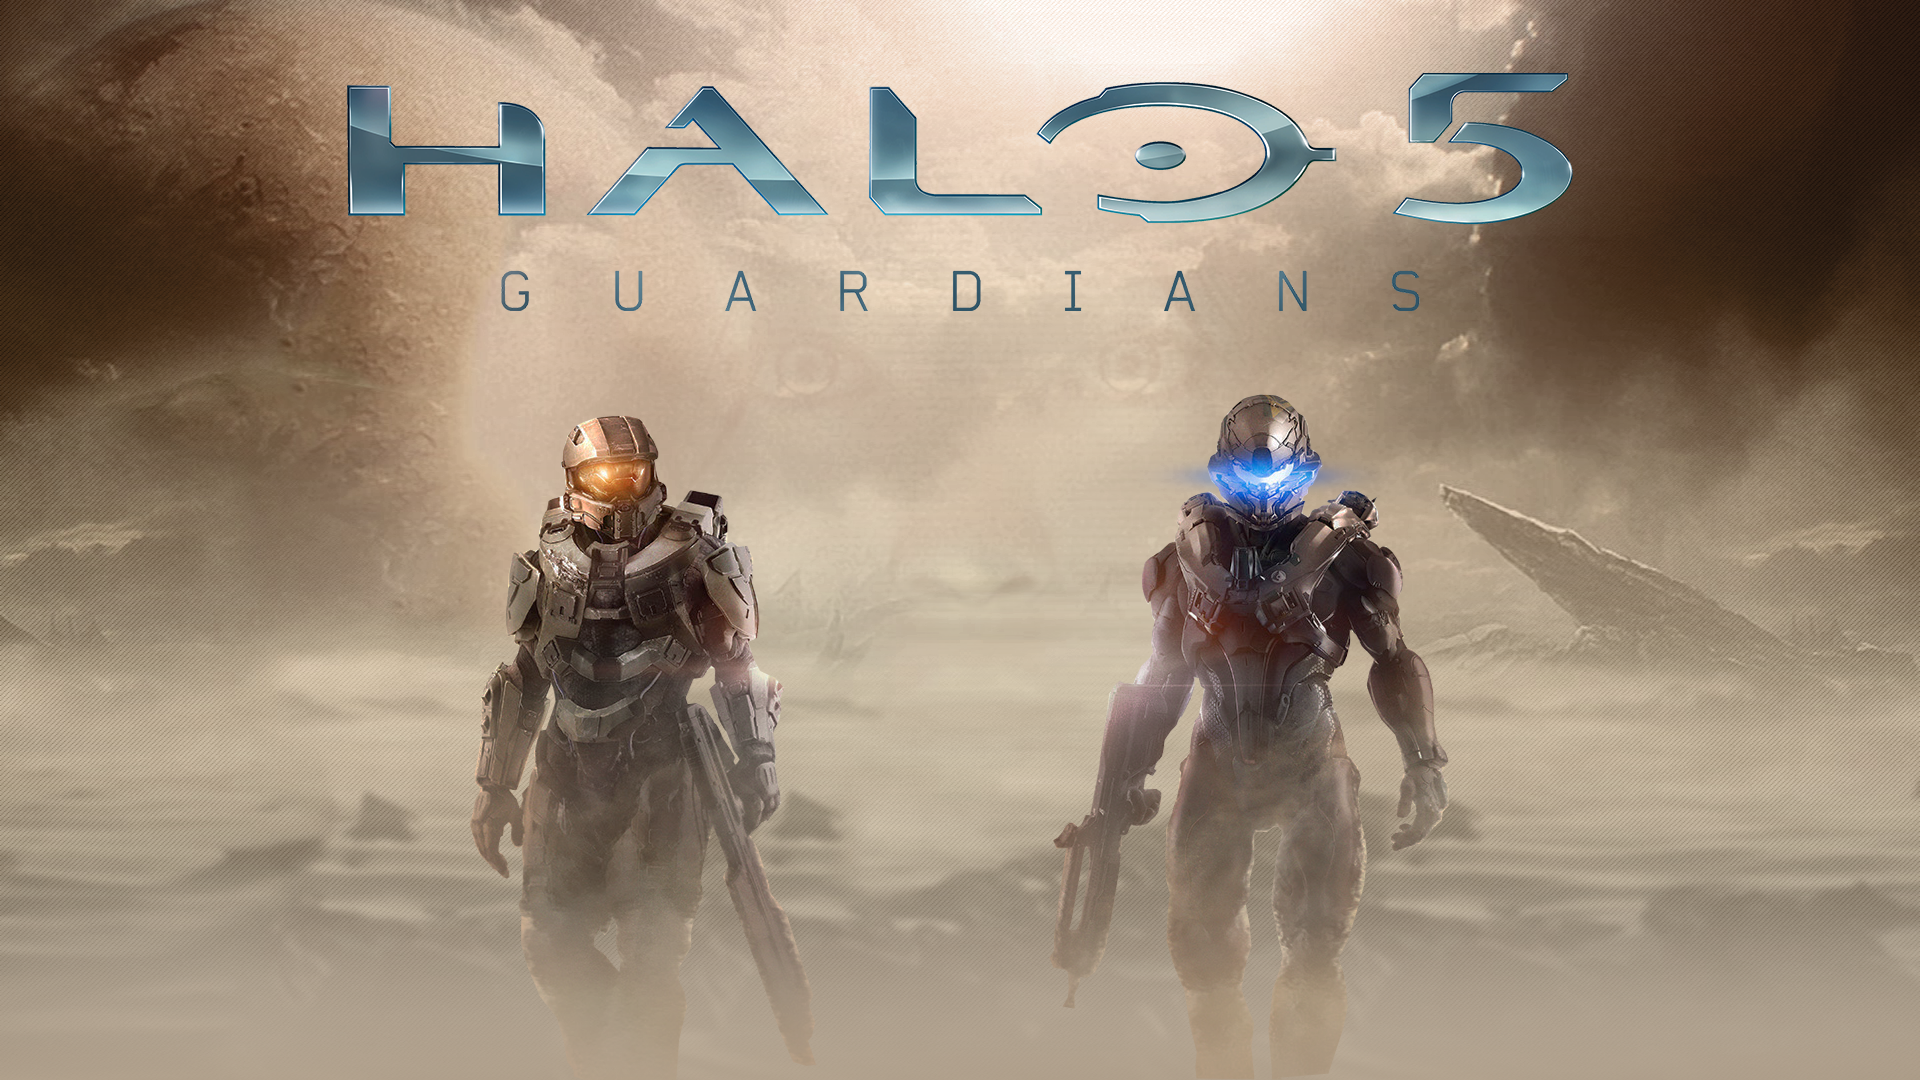 Halo 5 Guardians DLC will be free